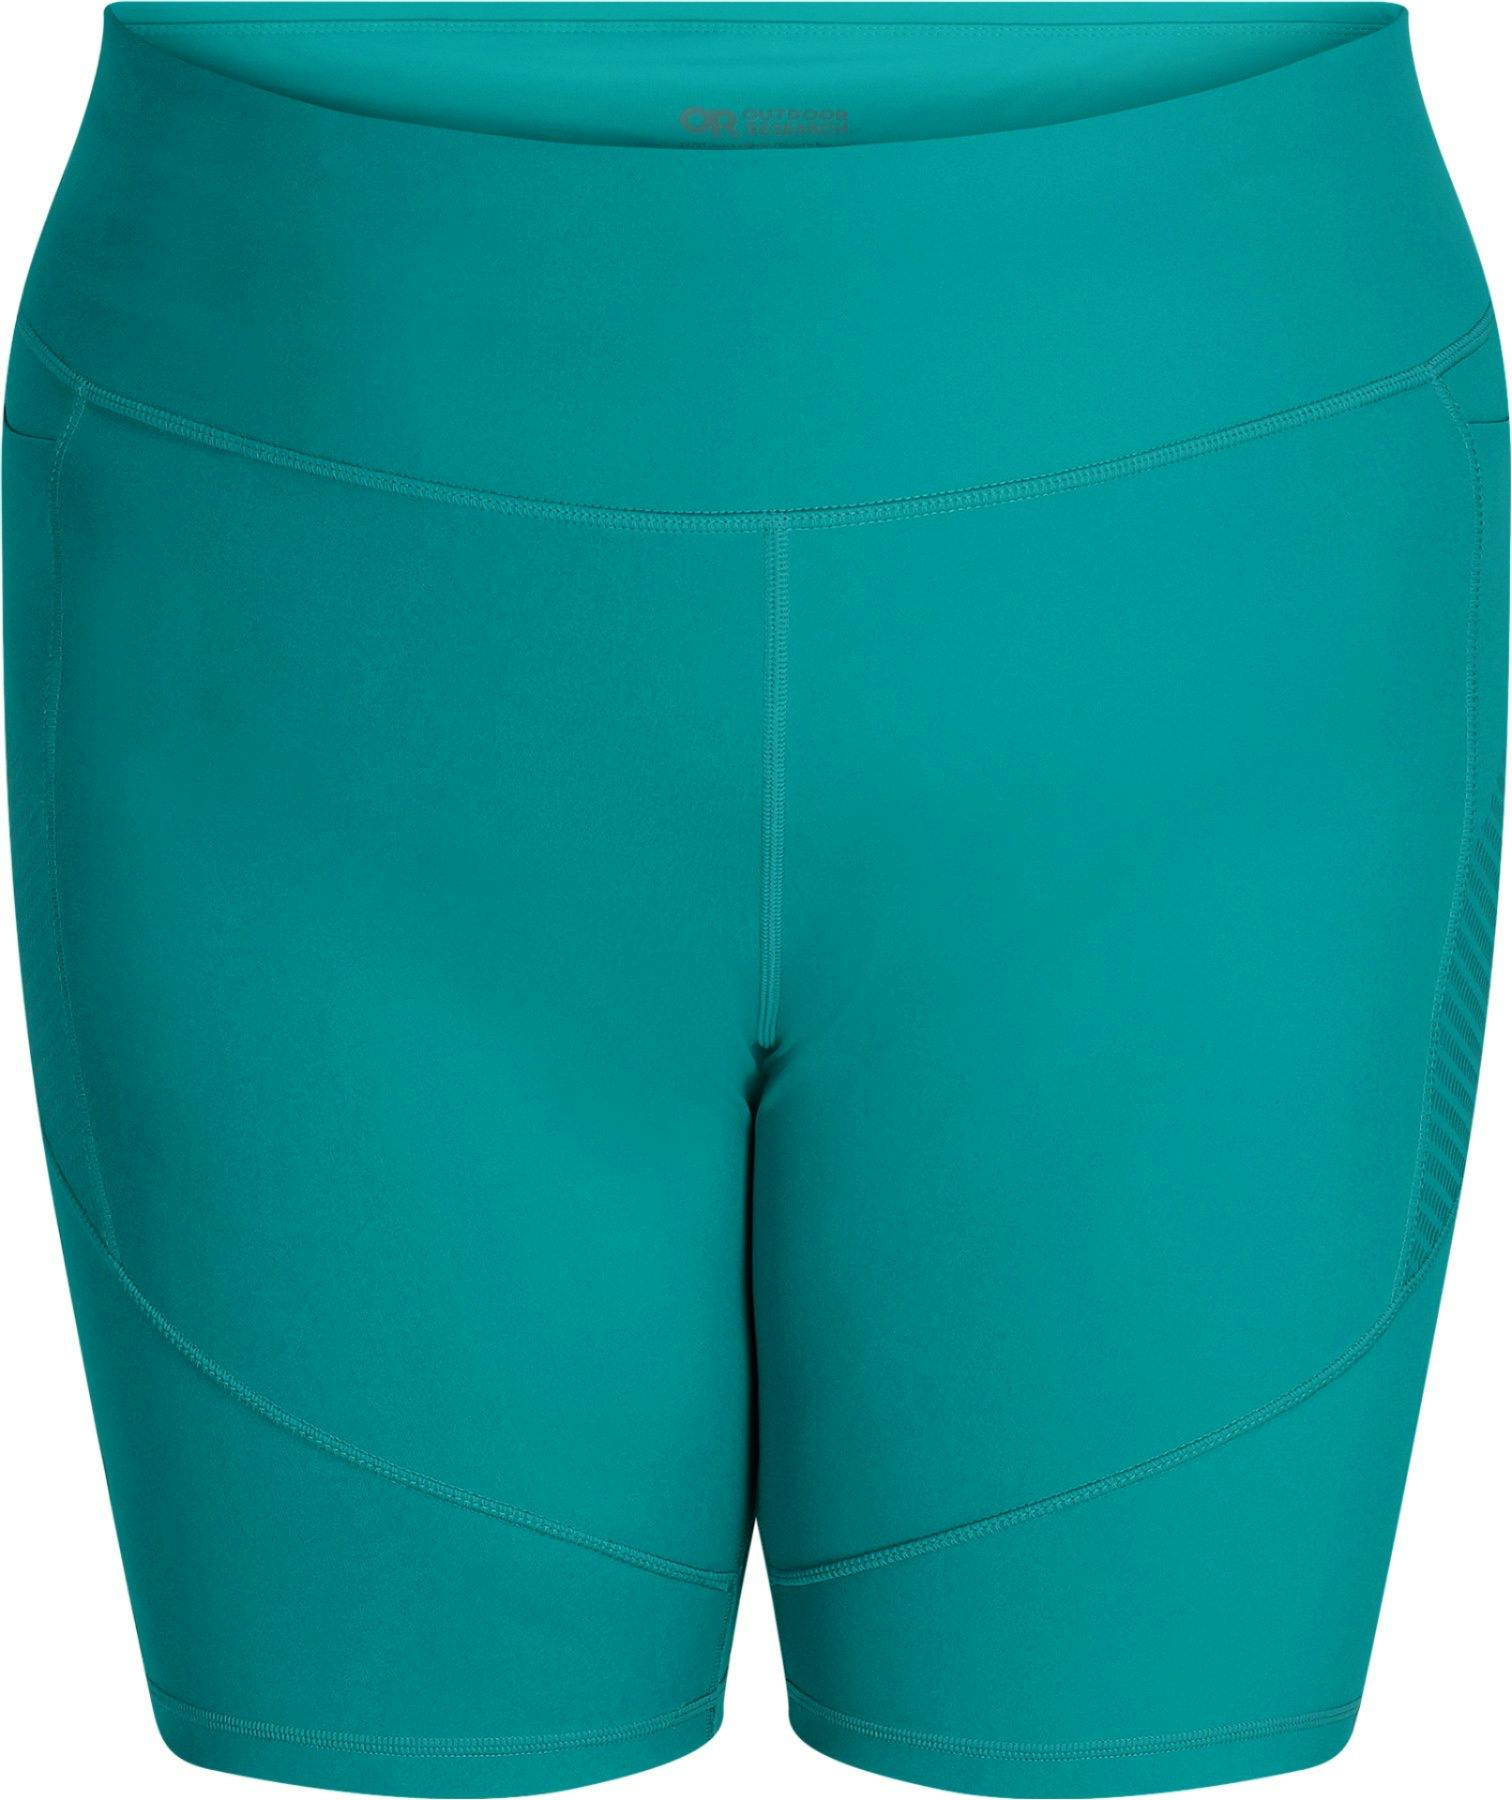 Product image for Ad-Vantage Plus Size Shorts 10In - Women's